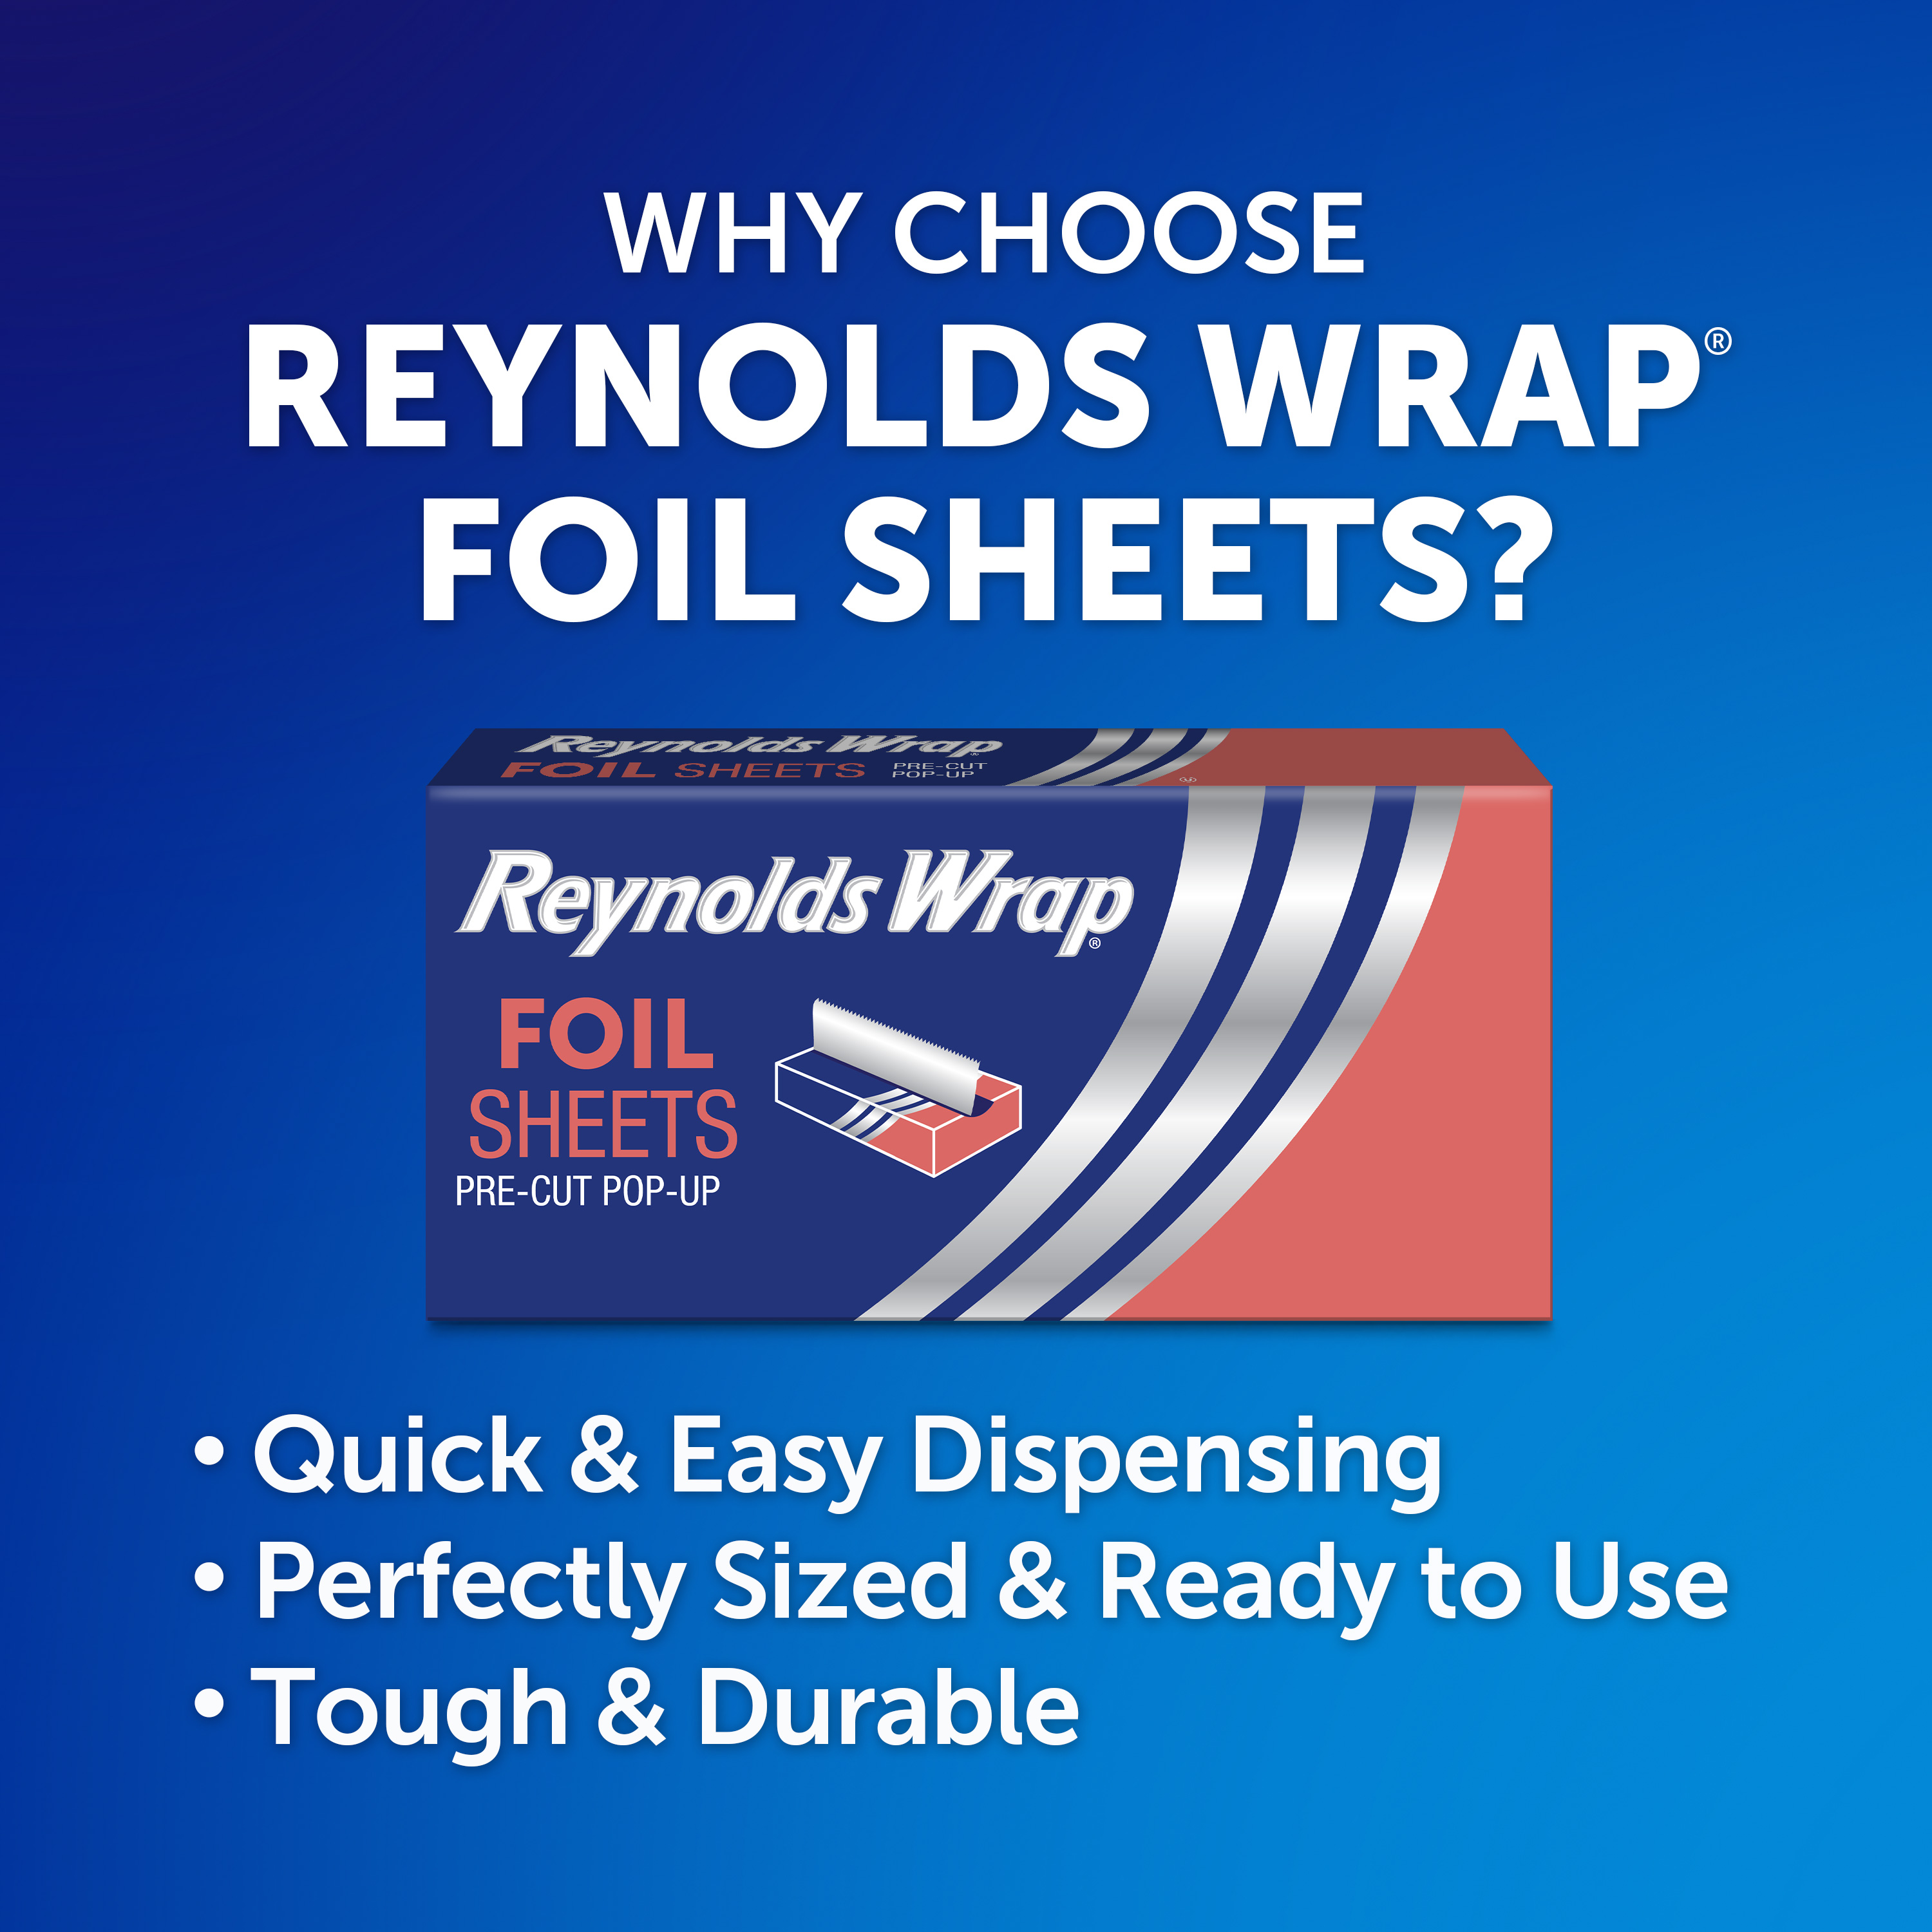 Reynolds Wrap Pre-Cut Aluminum Foil Sheets, 14x10.25 Inches, 50 Sheets - image 2 of 7